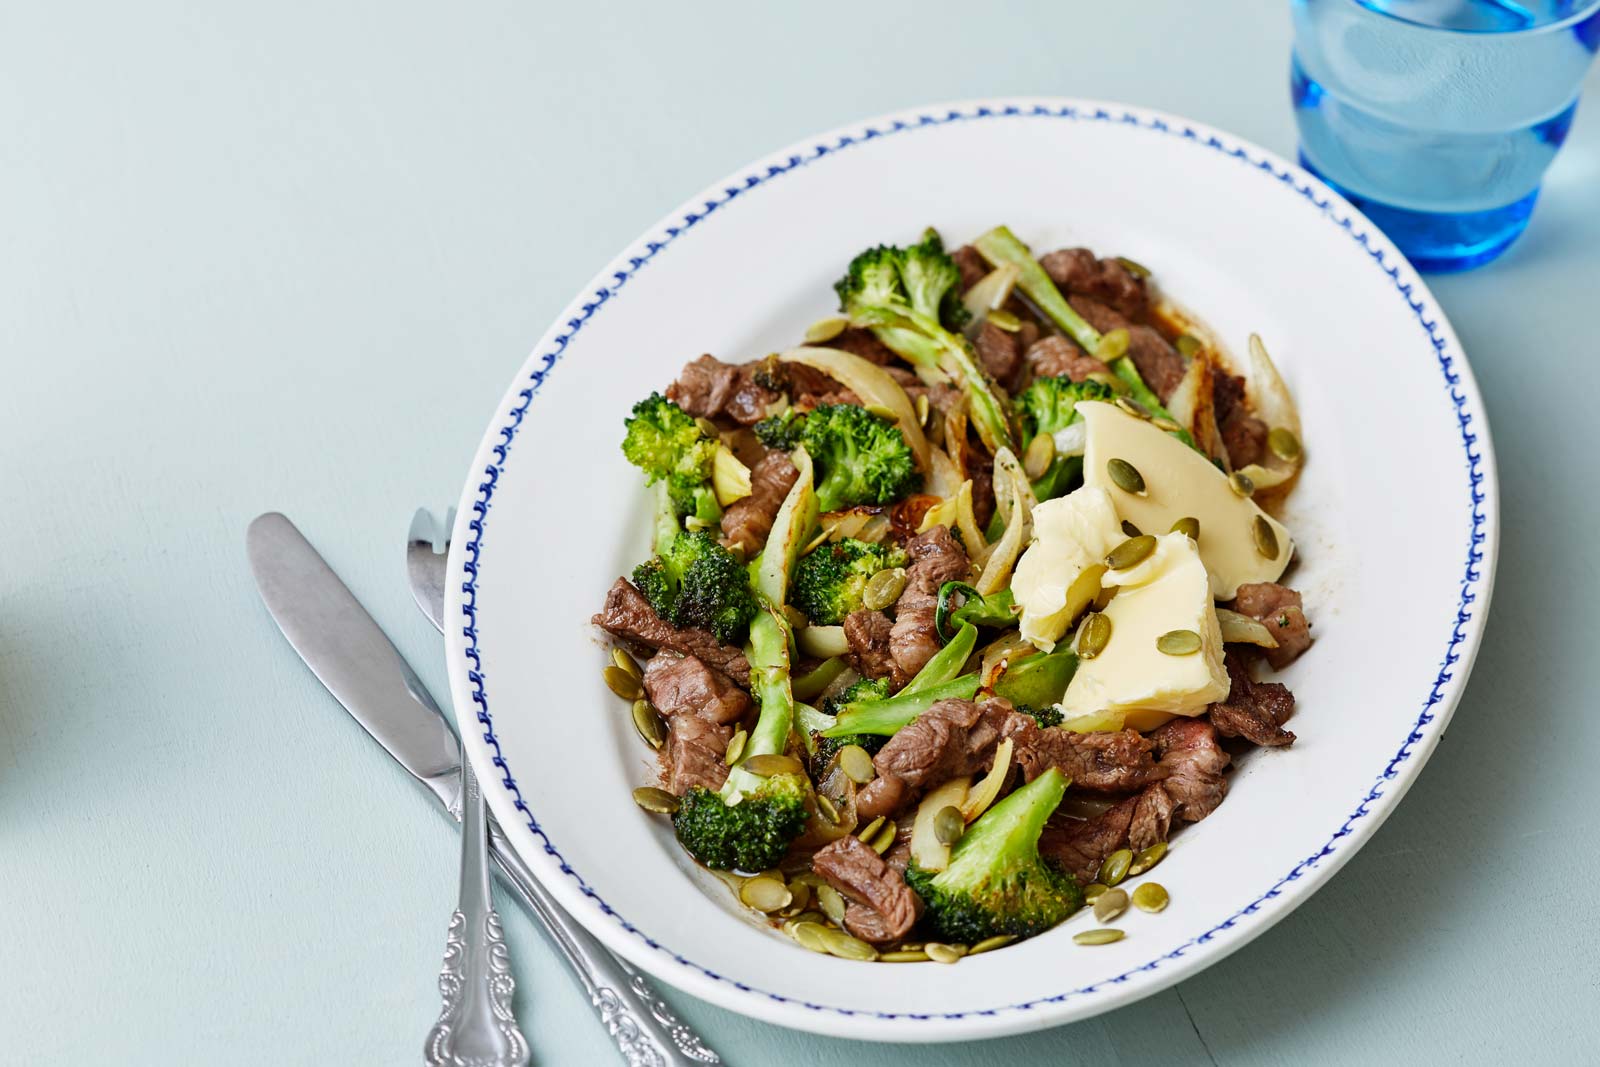 Steak-and-broccoli-stir-fry-with-toasted-pumpkin-seeds